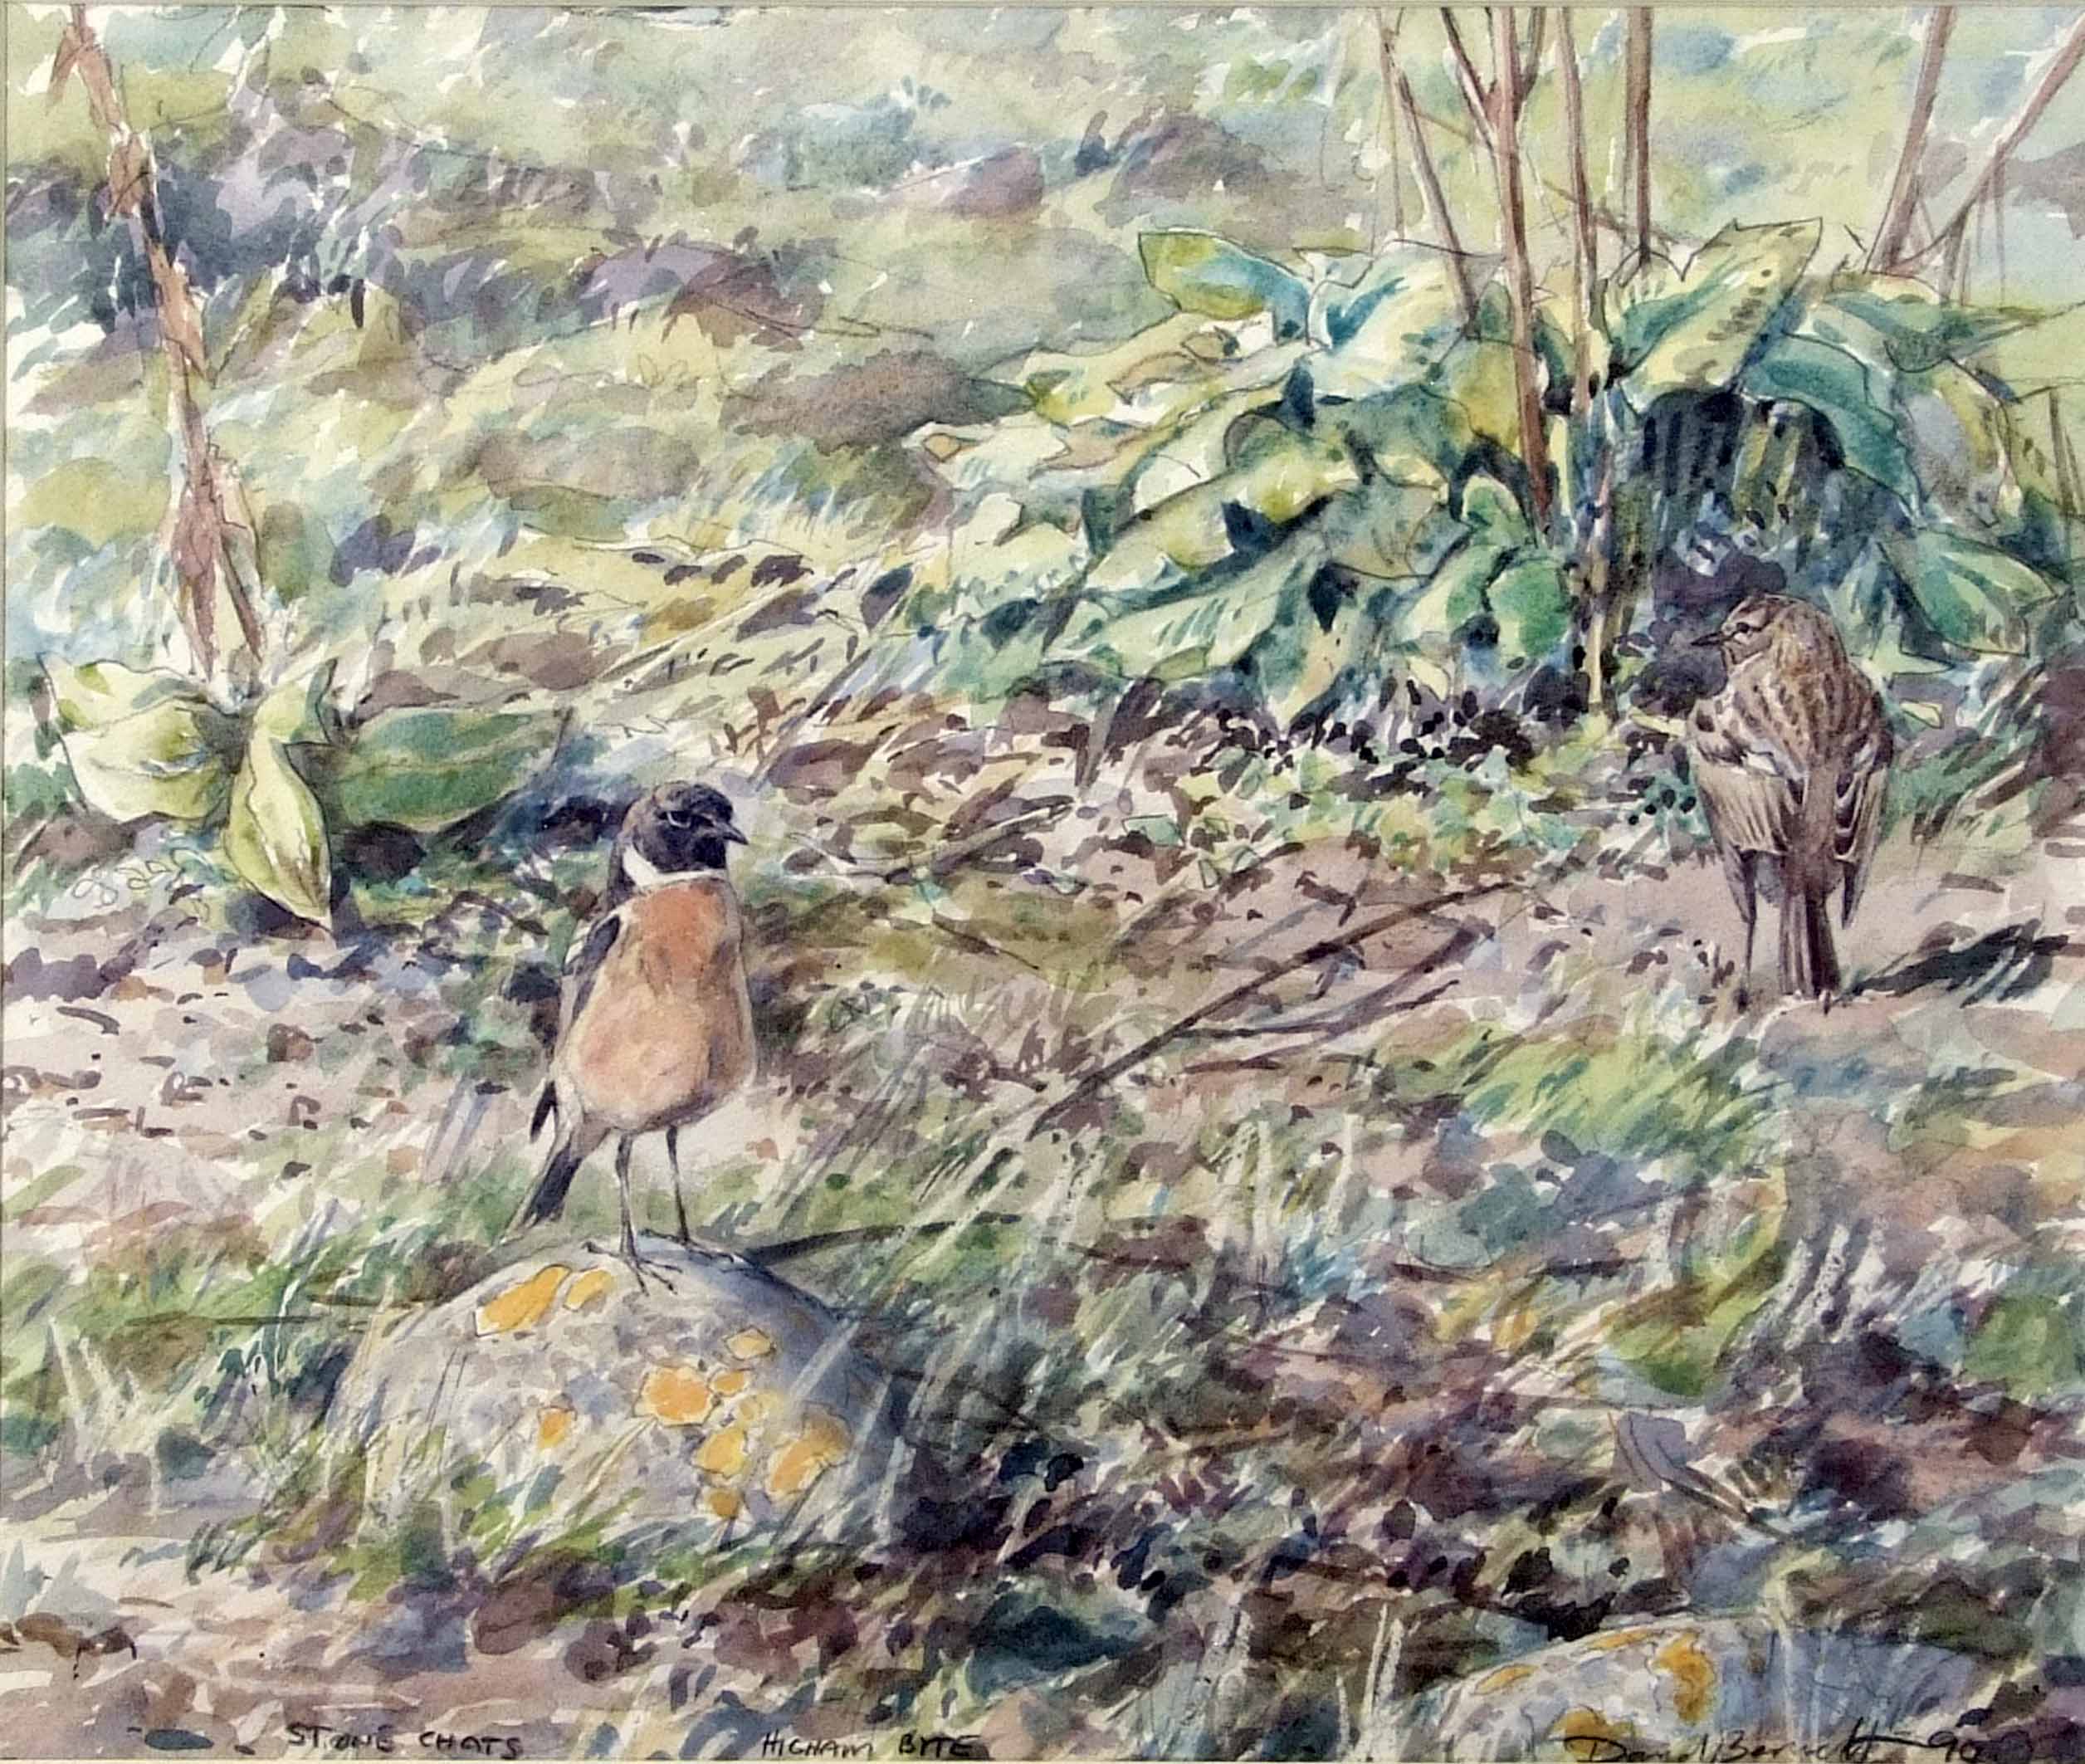 AR David Bennett (contemporary), "Stonechats", watercolour, signed and dated 90 lower right, 35 x - Image 2 of 2